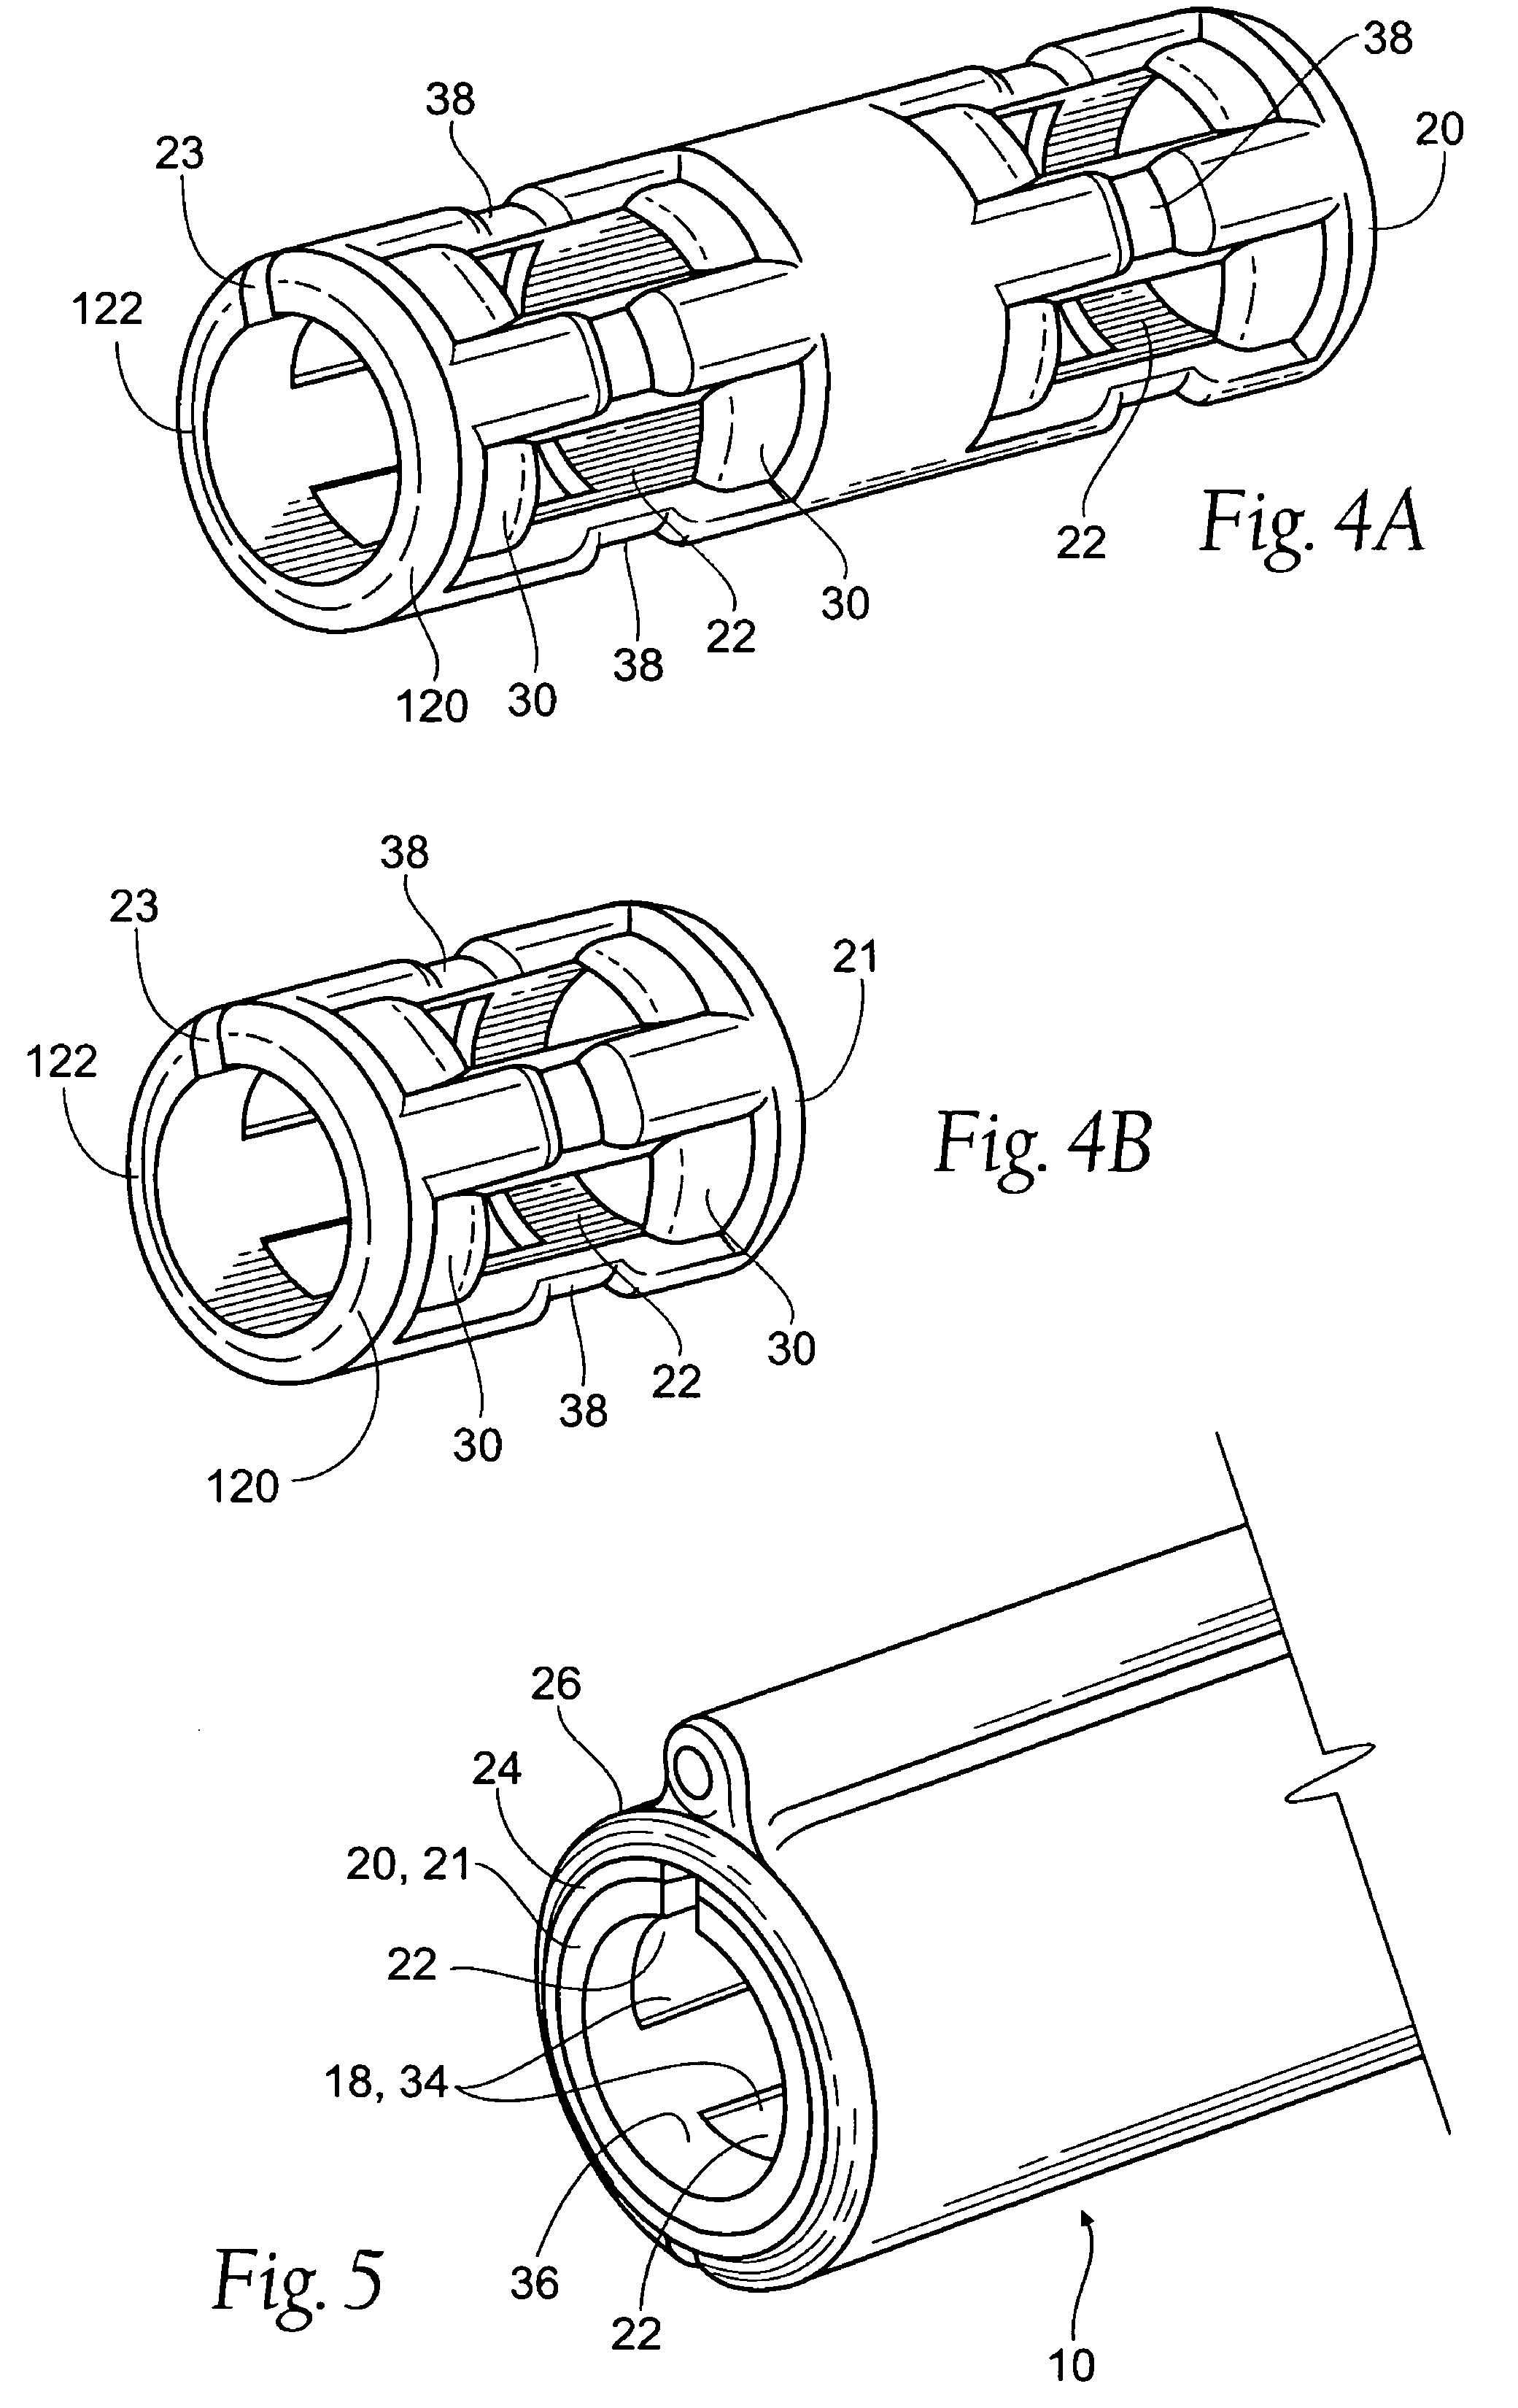 Devices, systems, and methods employing a molded nerve cuff electrode